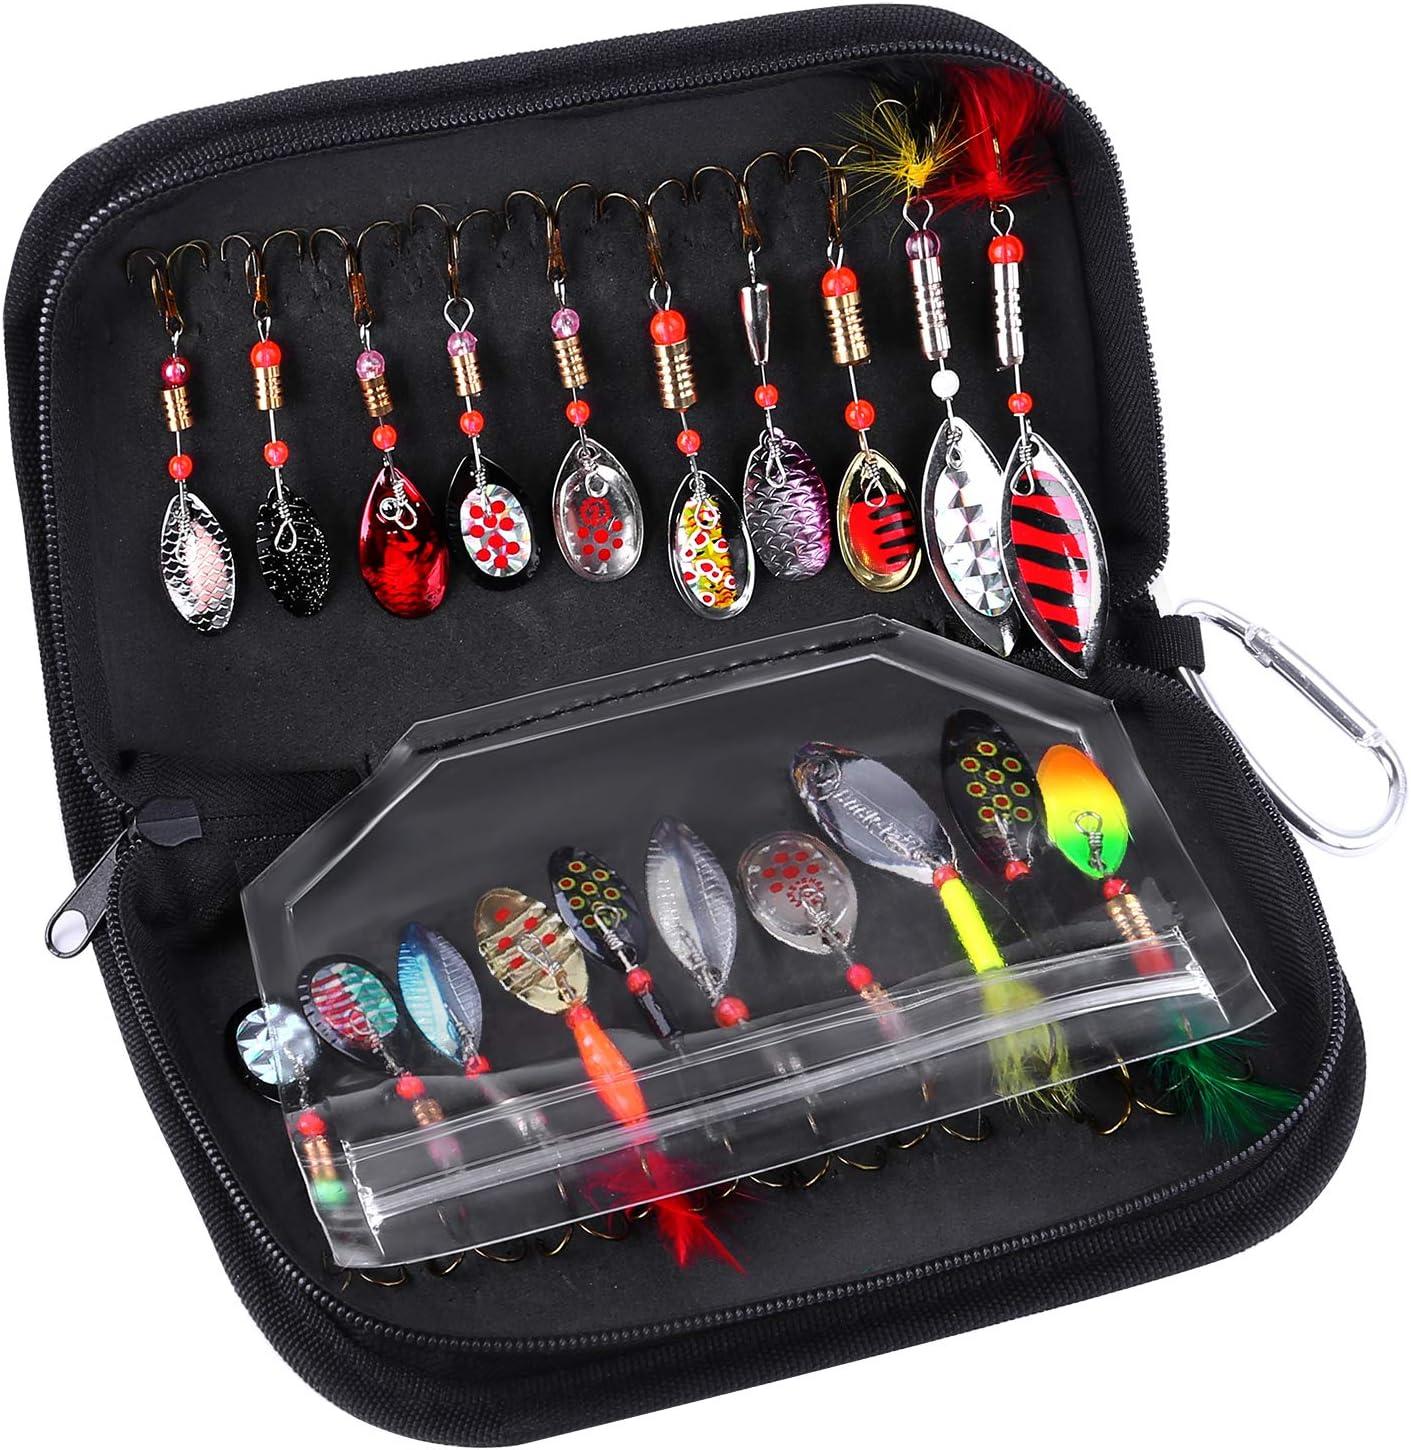 TOPFORT Fishing Lures, Fishing Spoon,Trout Lures, Bass Lures, Spinning Lures,Hard  Metal Spinner Baits kit with Carry Bag 20Pcs Fishing Trout Lures